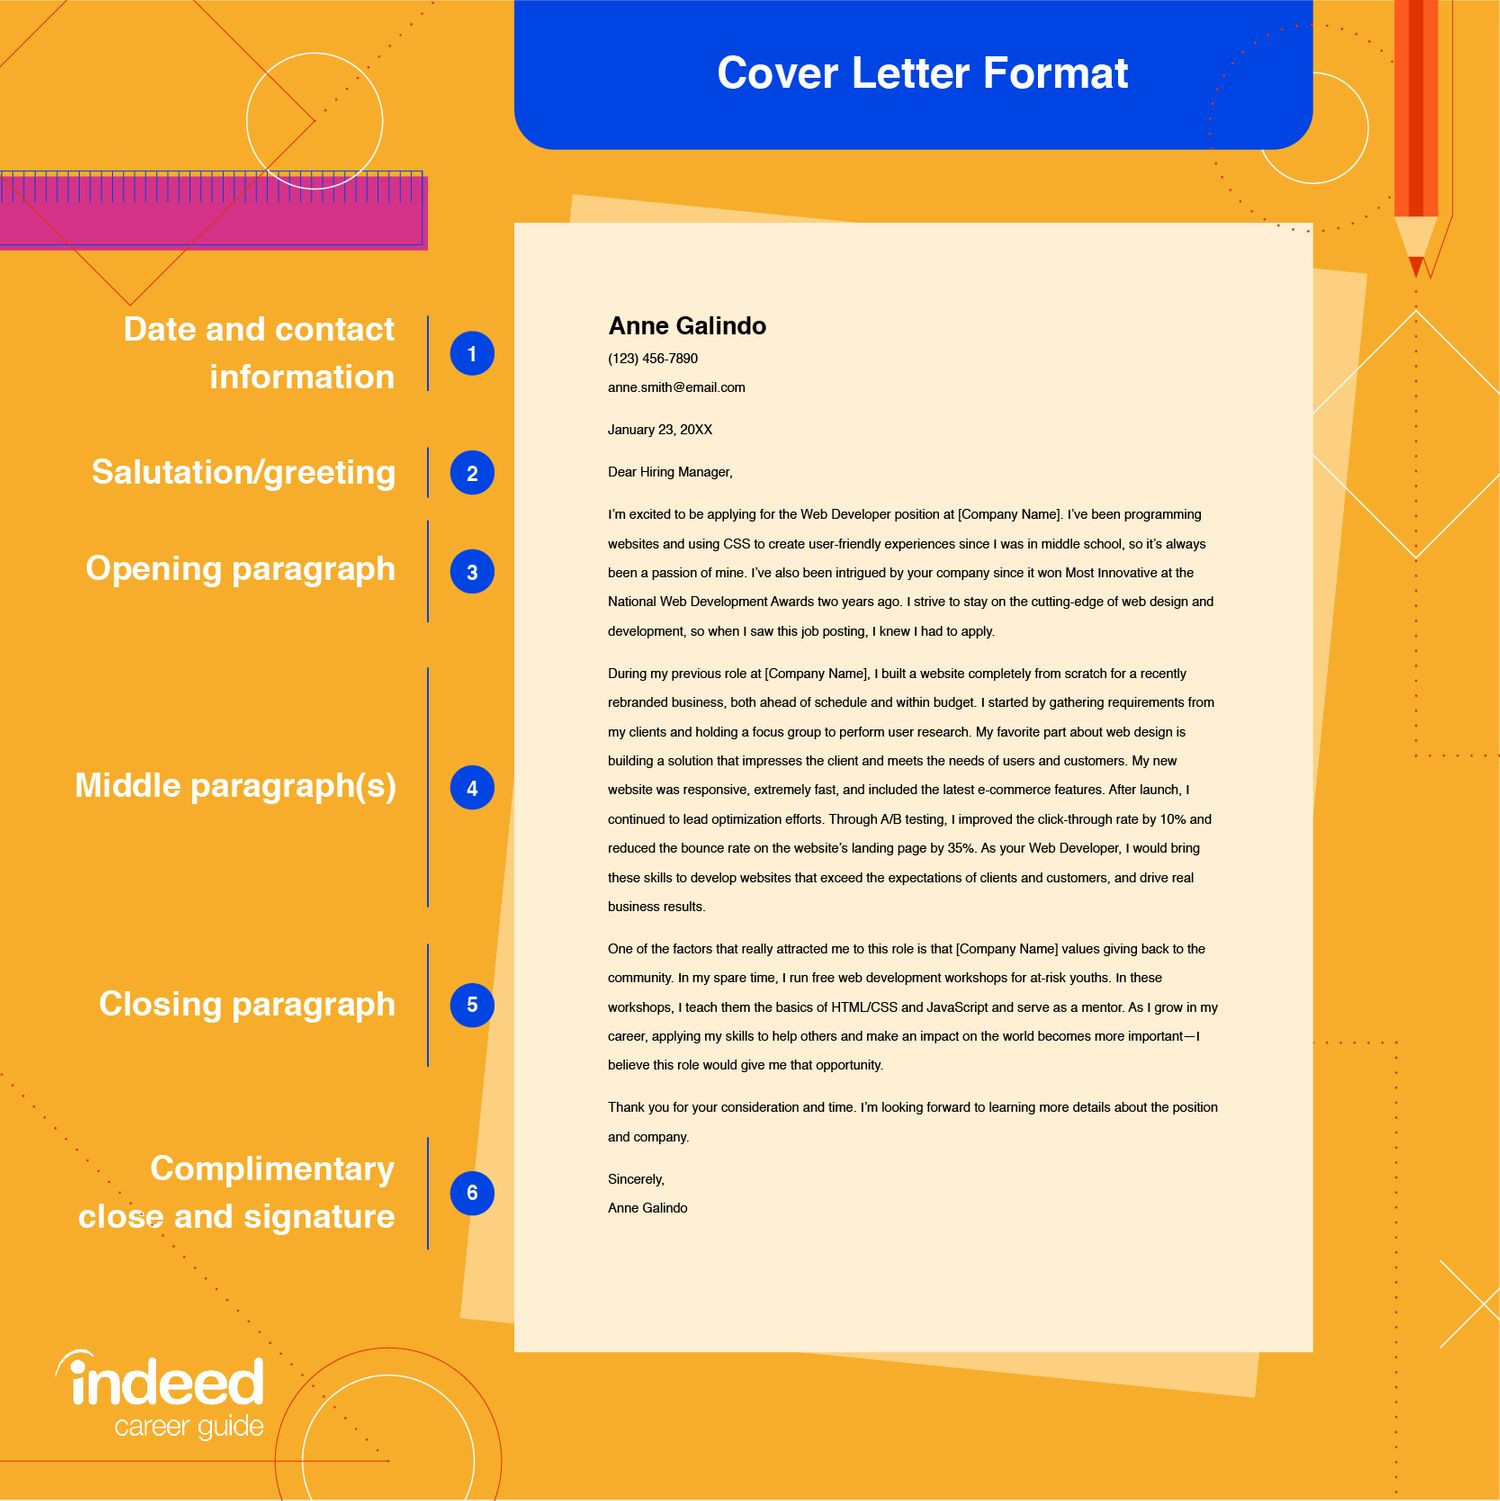 Sample Email for Resume and Cover Letter Submission How to Send An Email Cover Letter (with Example) Indeed.com